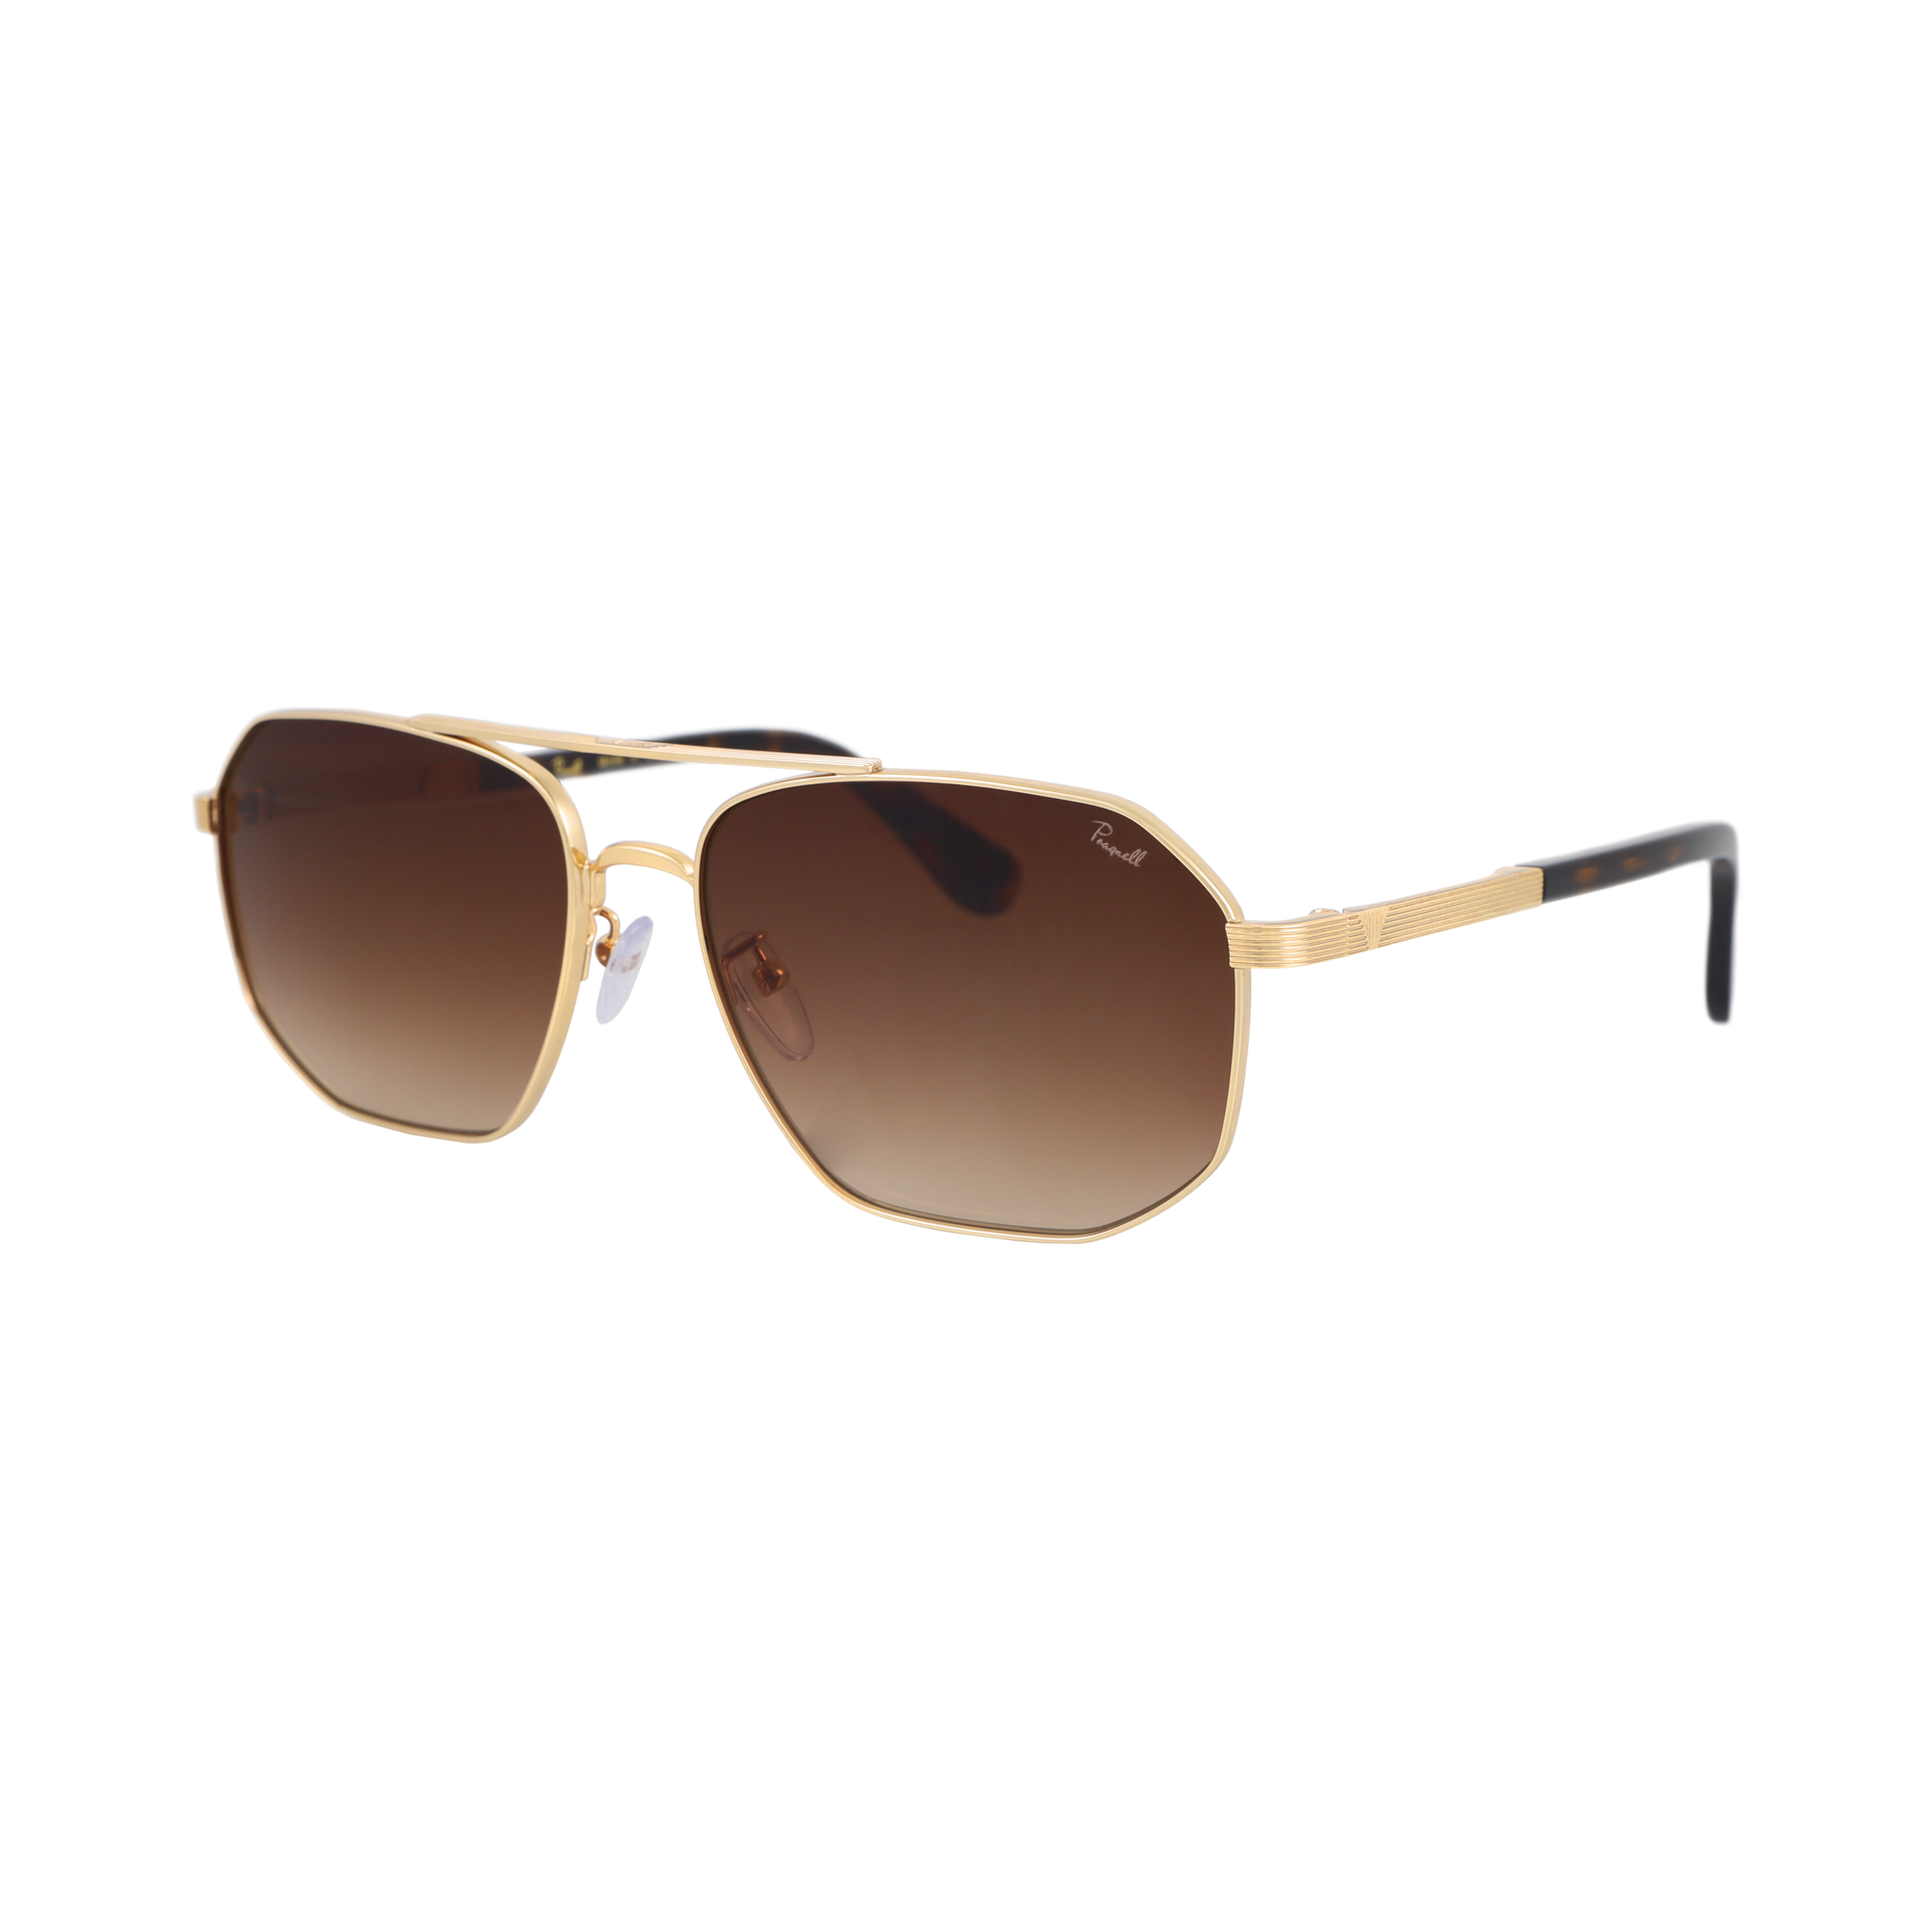 Pragnell Gents Sunglasses Brown tint, UV400 protection_1